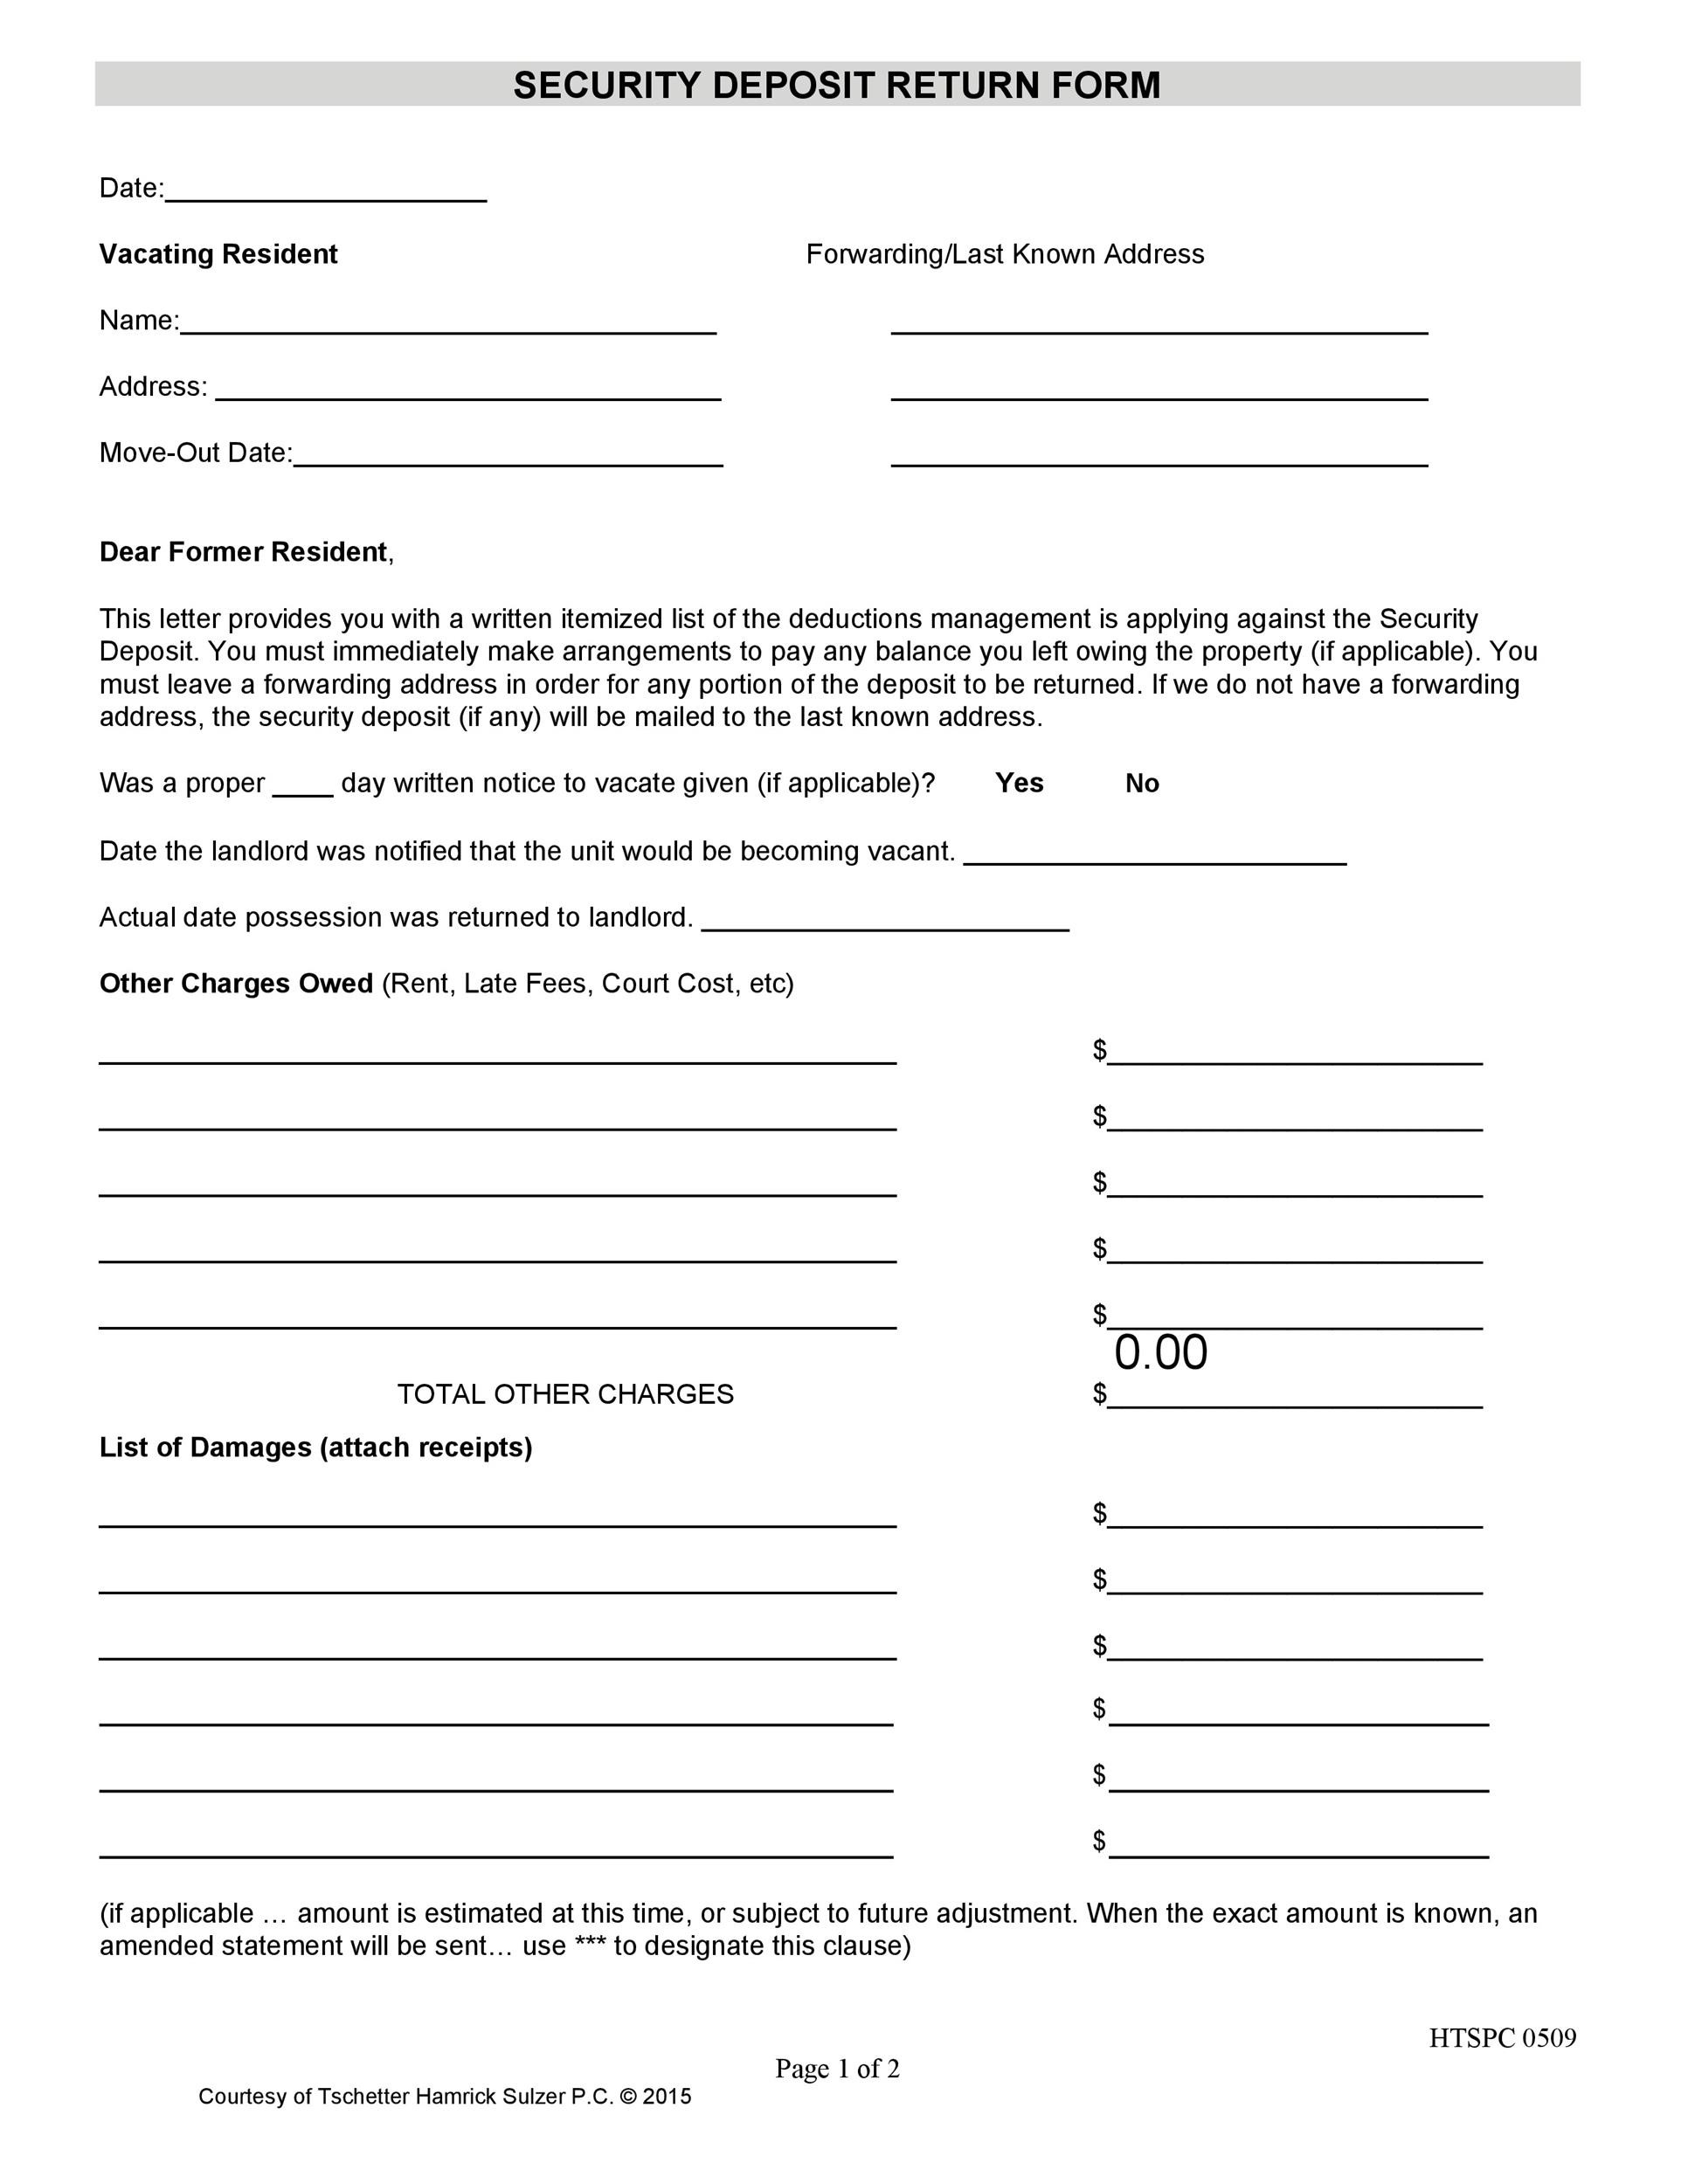 10 Effective Security Deposit Return Letters [MS Word] ᐅ TemplateLab Within Return Of Security Deposit Form Letter In Return Of Security Deposit Form Letter